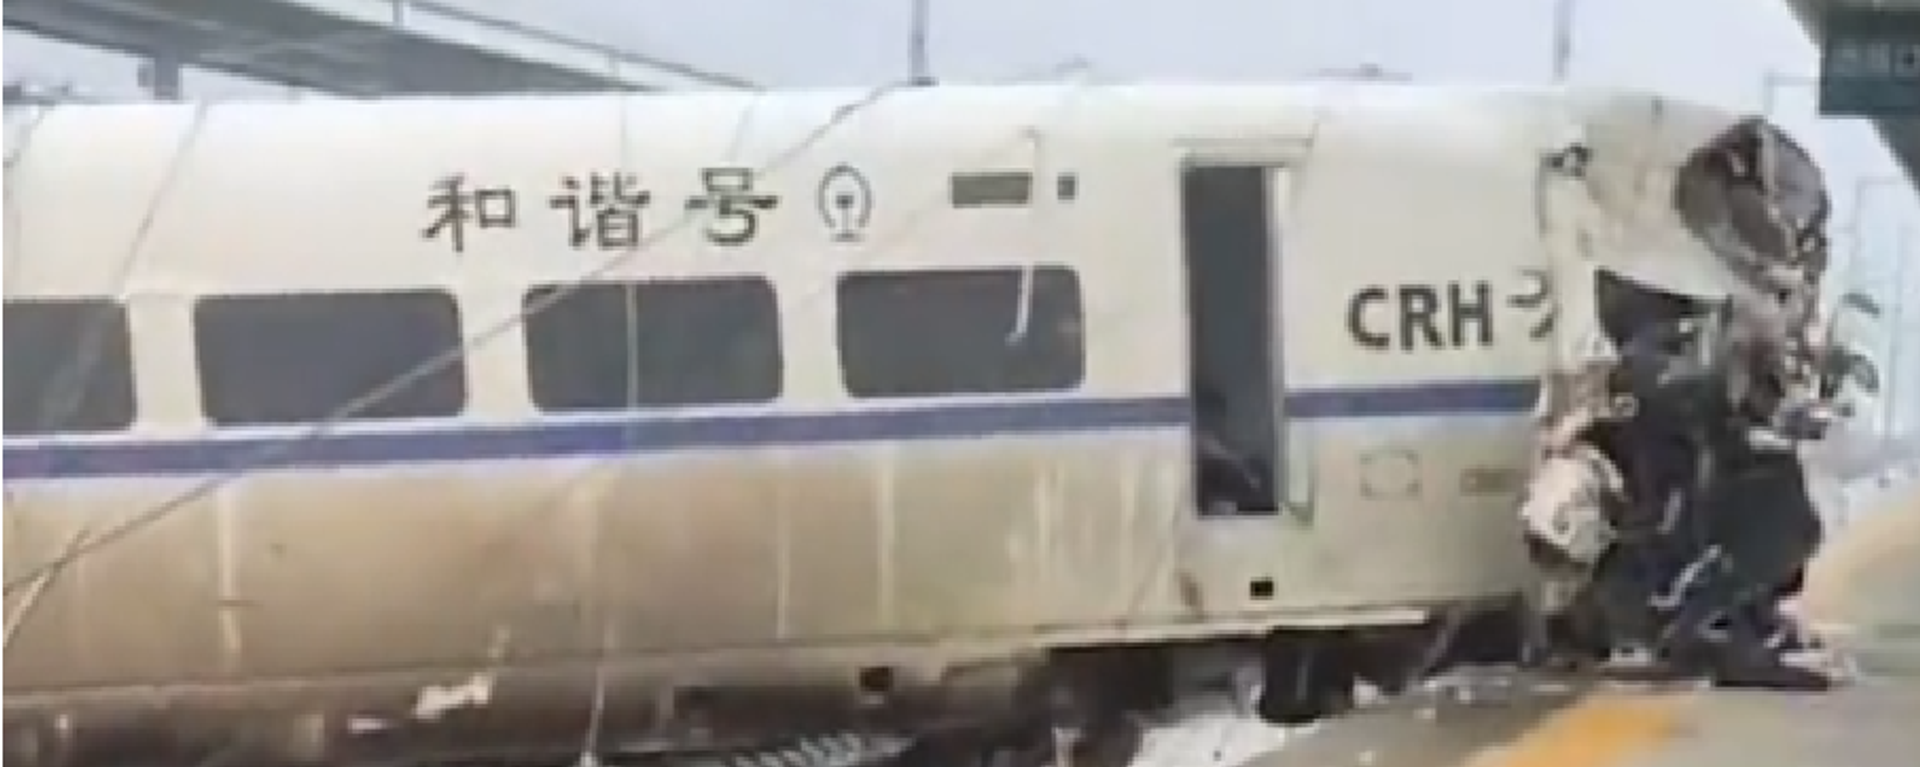 After a high-speed passenger train crashed in south-west China on Saturday, local rail authorities activated an emergency protocol, sending the injured to Rongjiang County Hospital for treatment, according to CCTV News. - Sputnik International, 1920, 04.06.2022